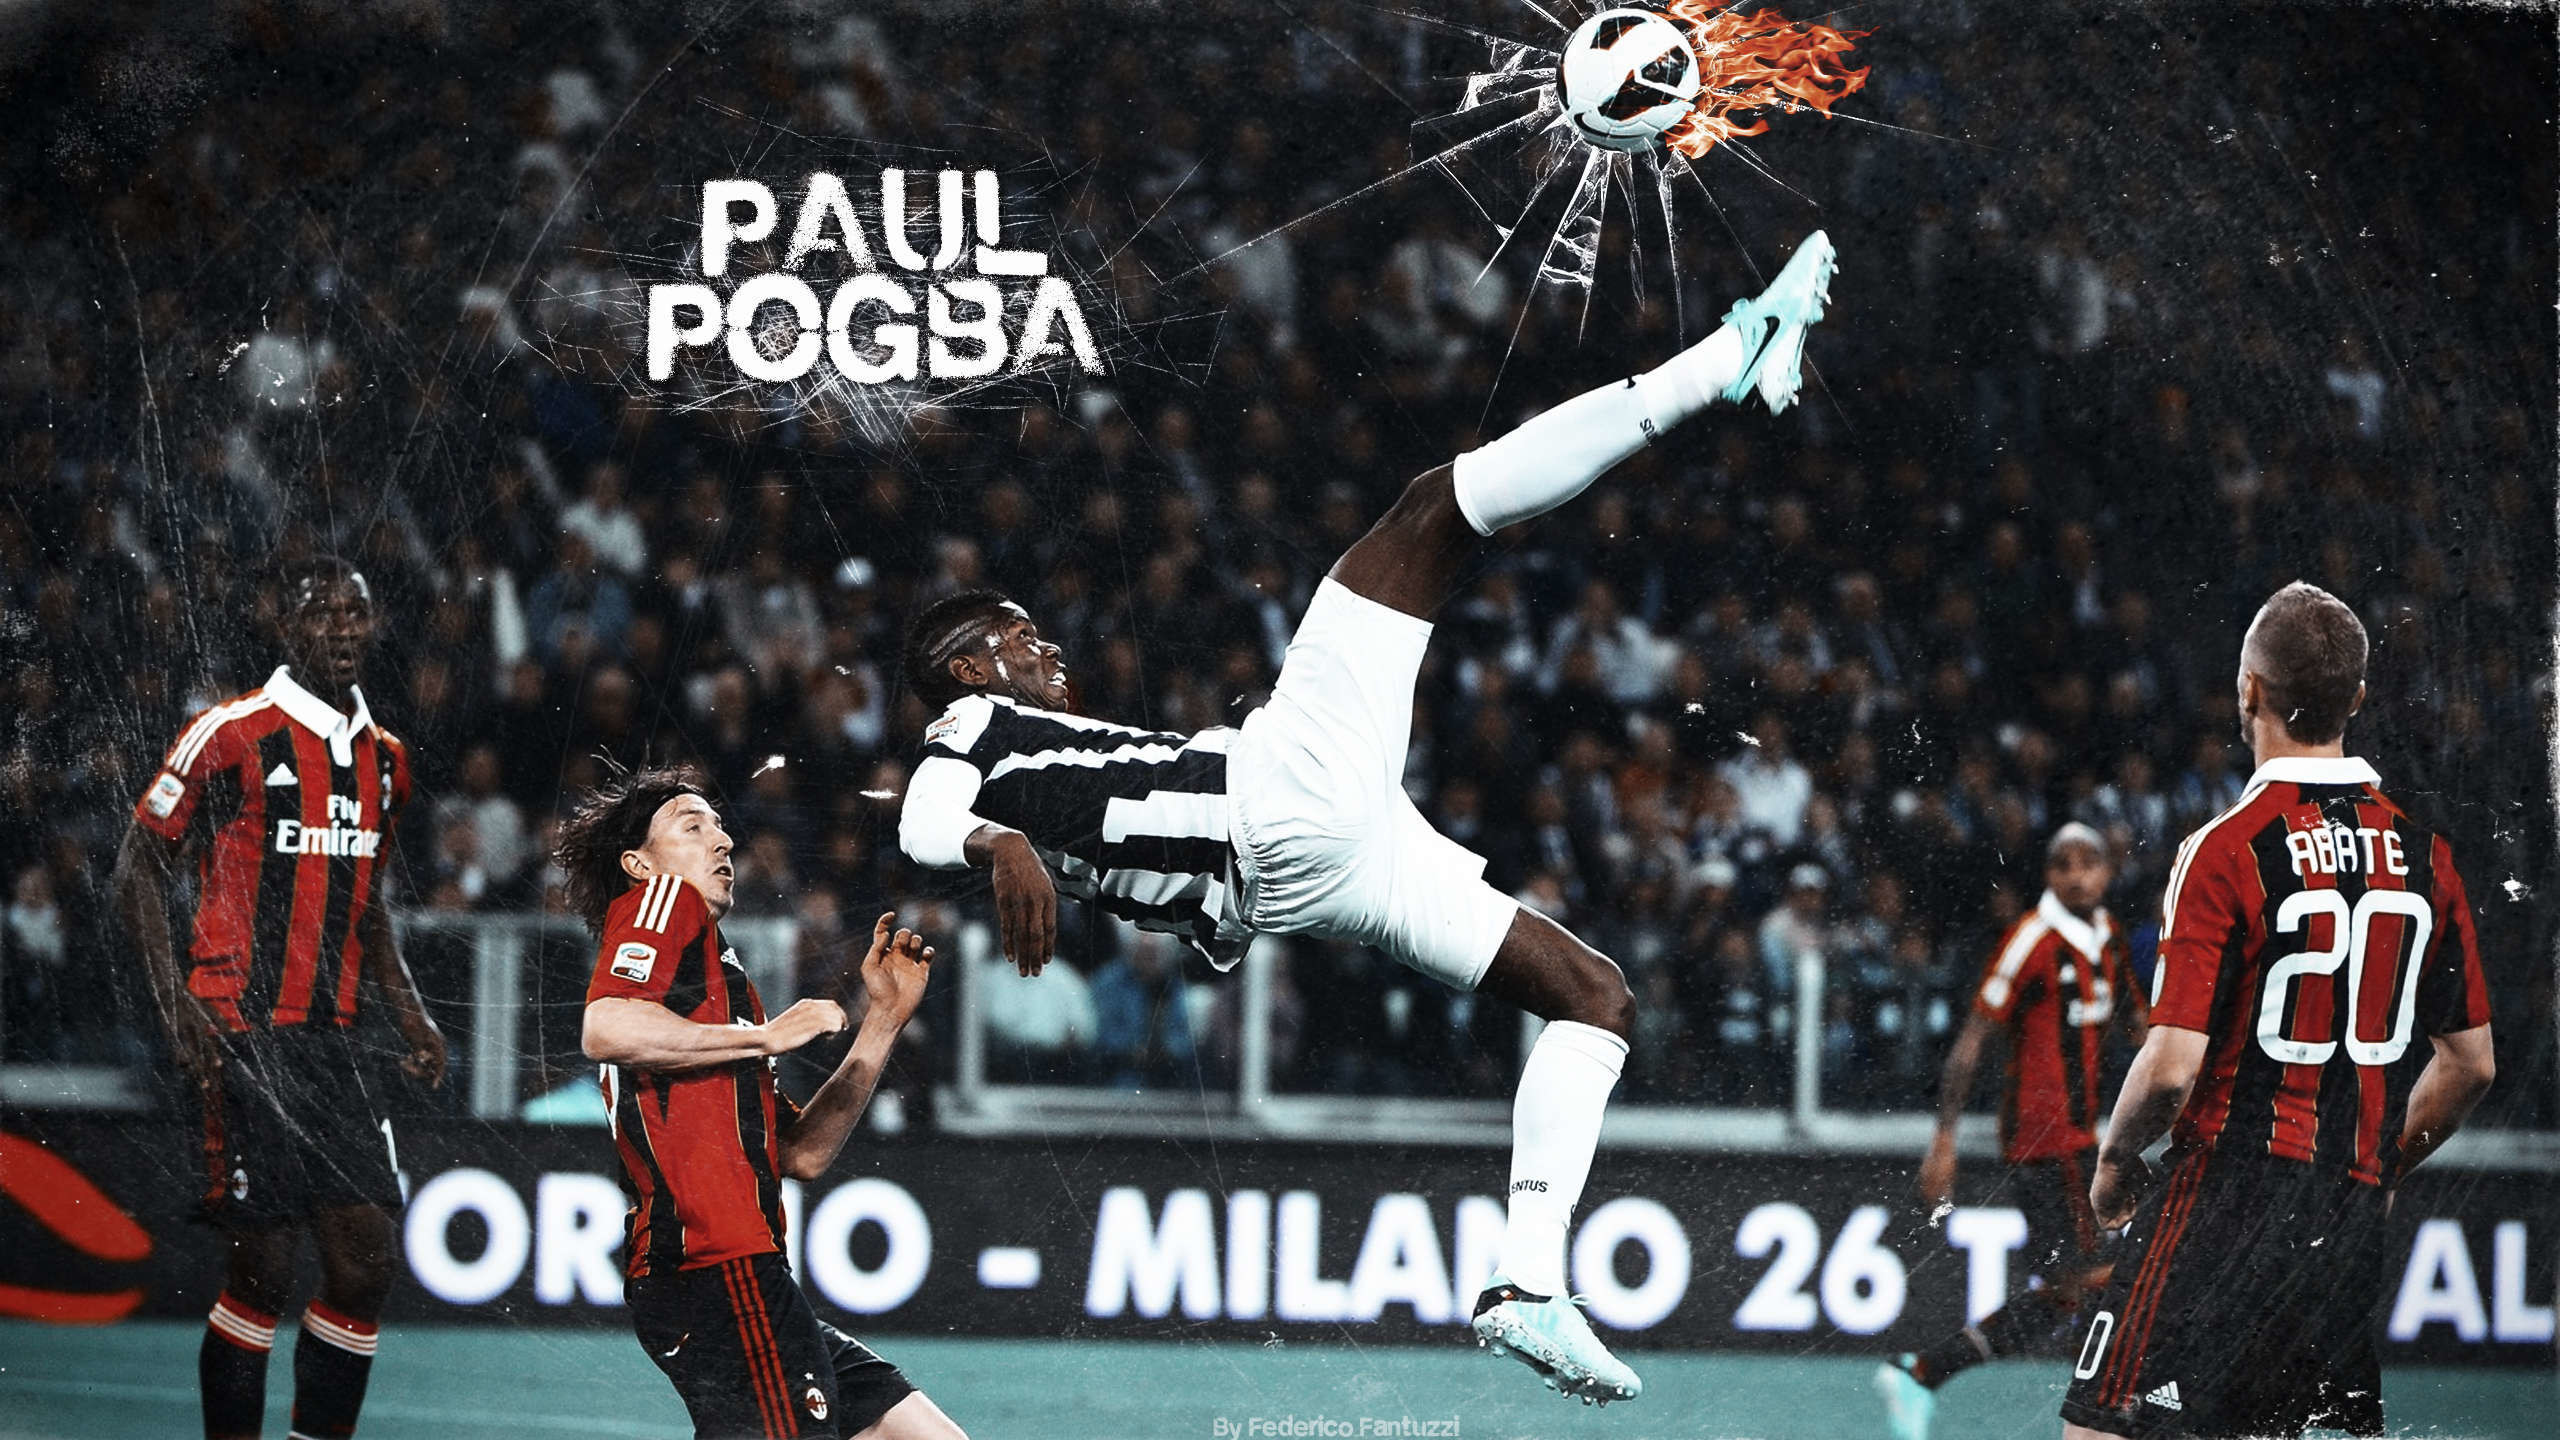 2560x1440 Paul Pogba Wallpapers High Resolution and Quality DownloadPaul Pogba